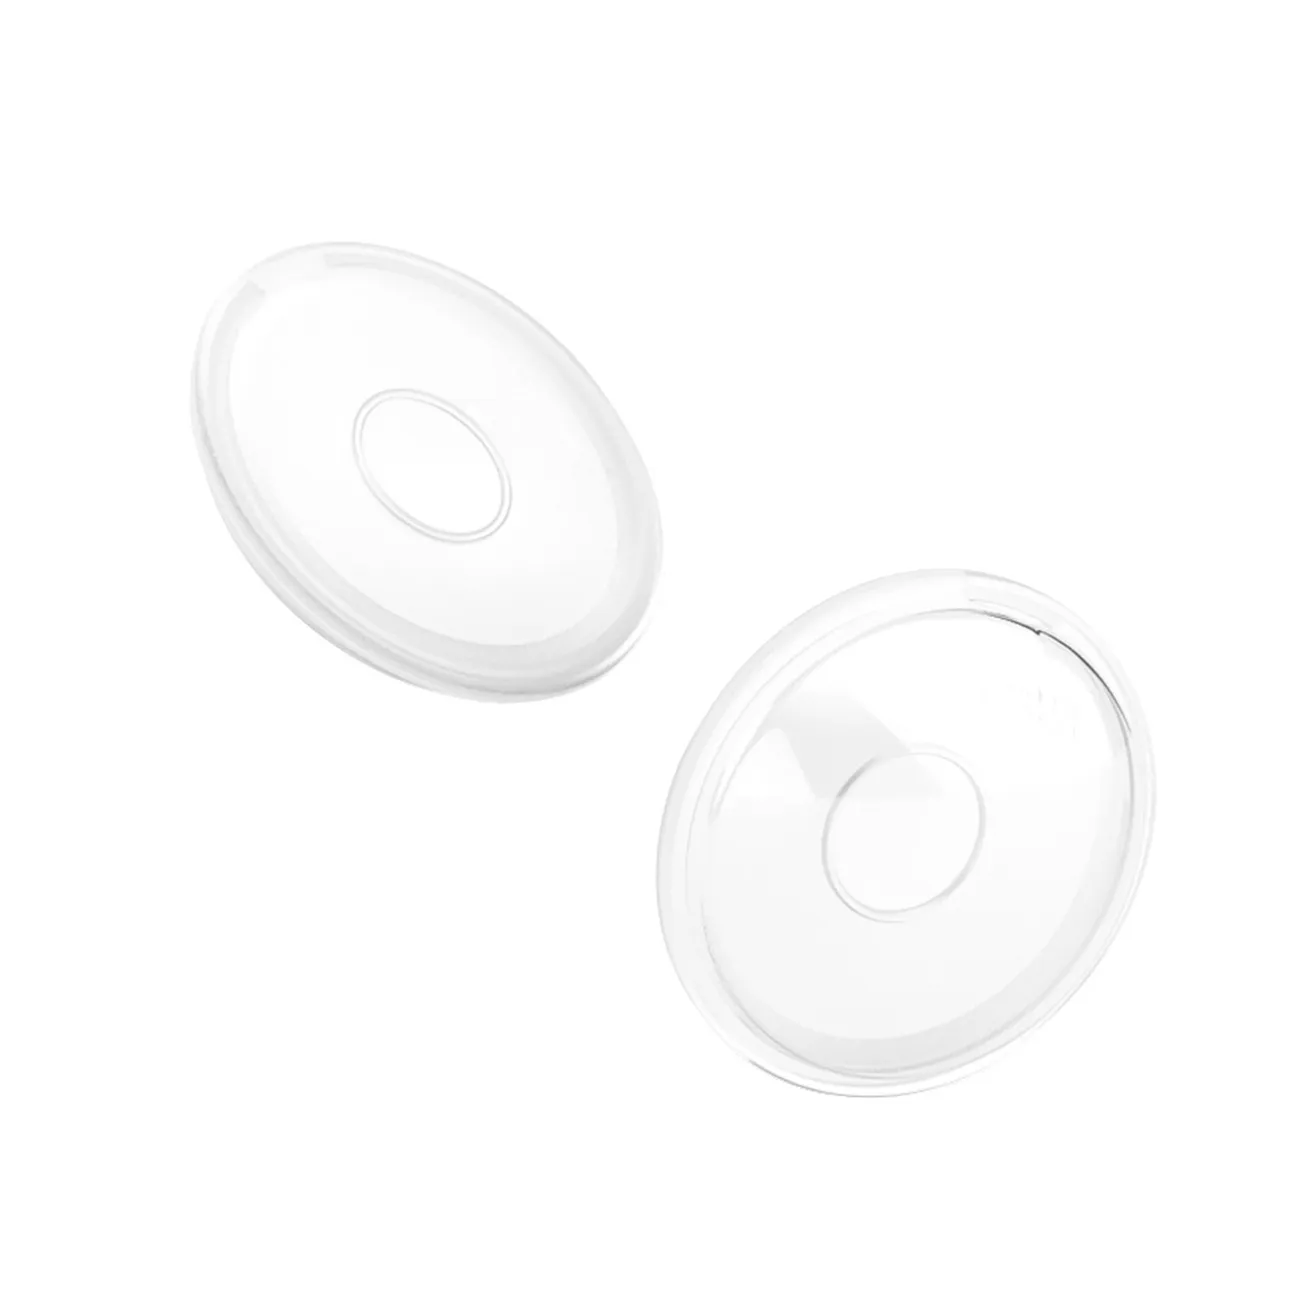 2-pack Reusable Comfort Breast Shells for Breastfeeding Relief & Protect Cracked Sore Nipples & Collect Leaked Breast Milk  big image 1